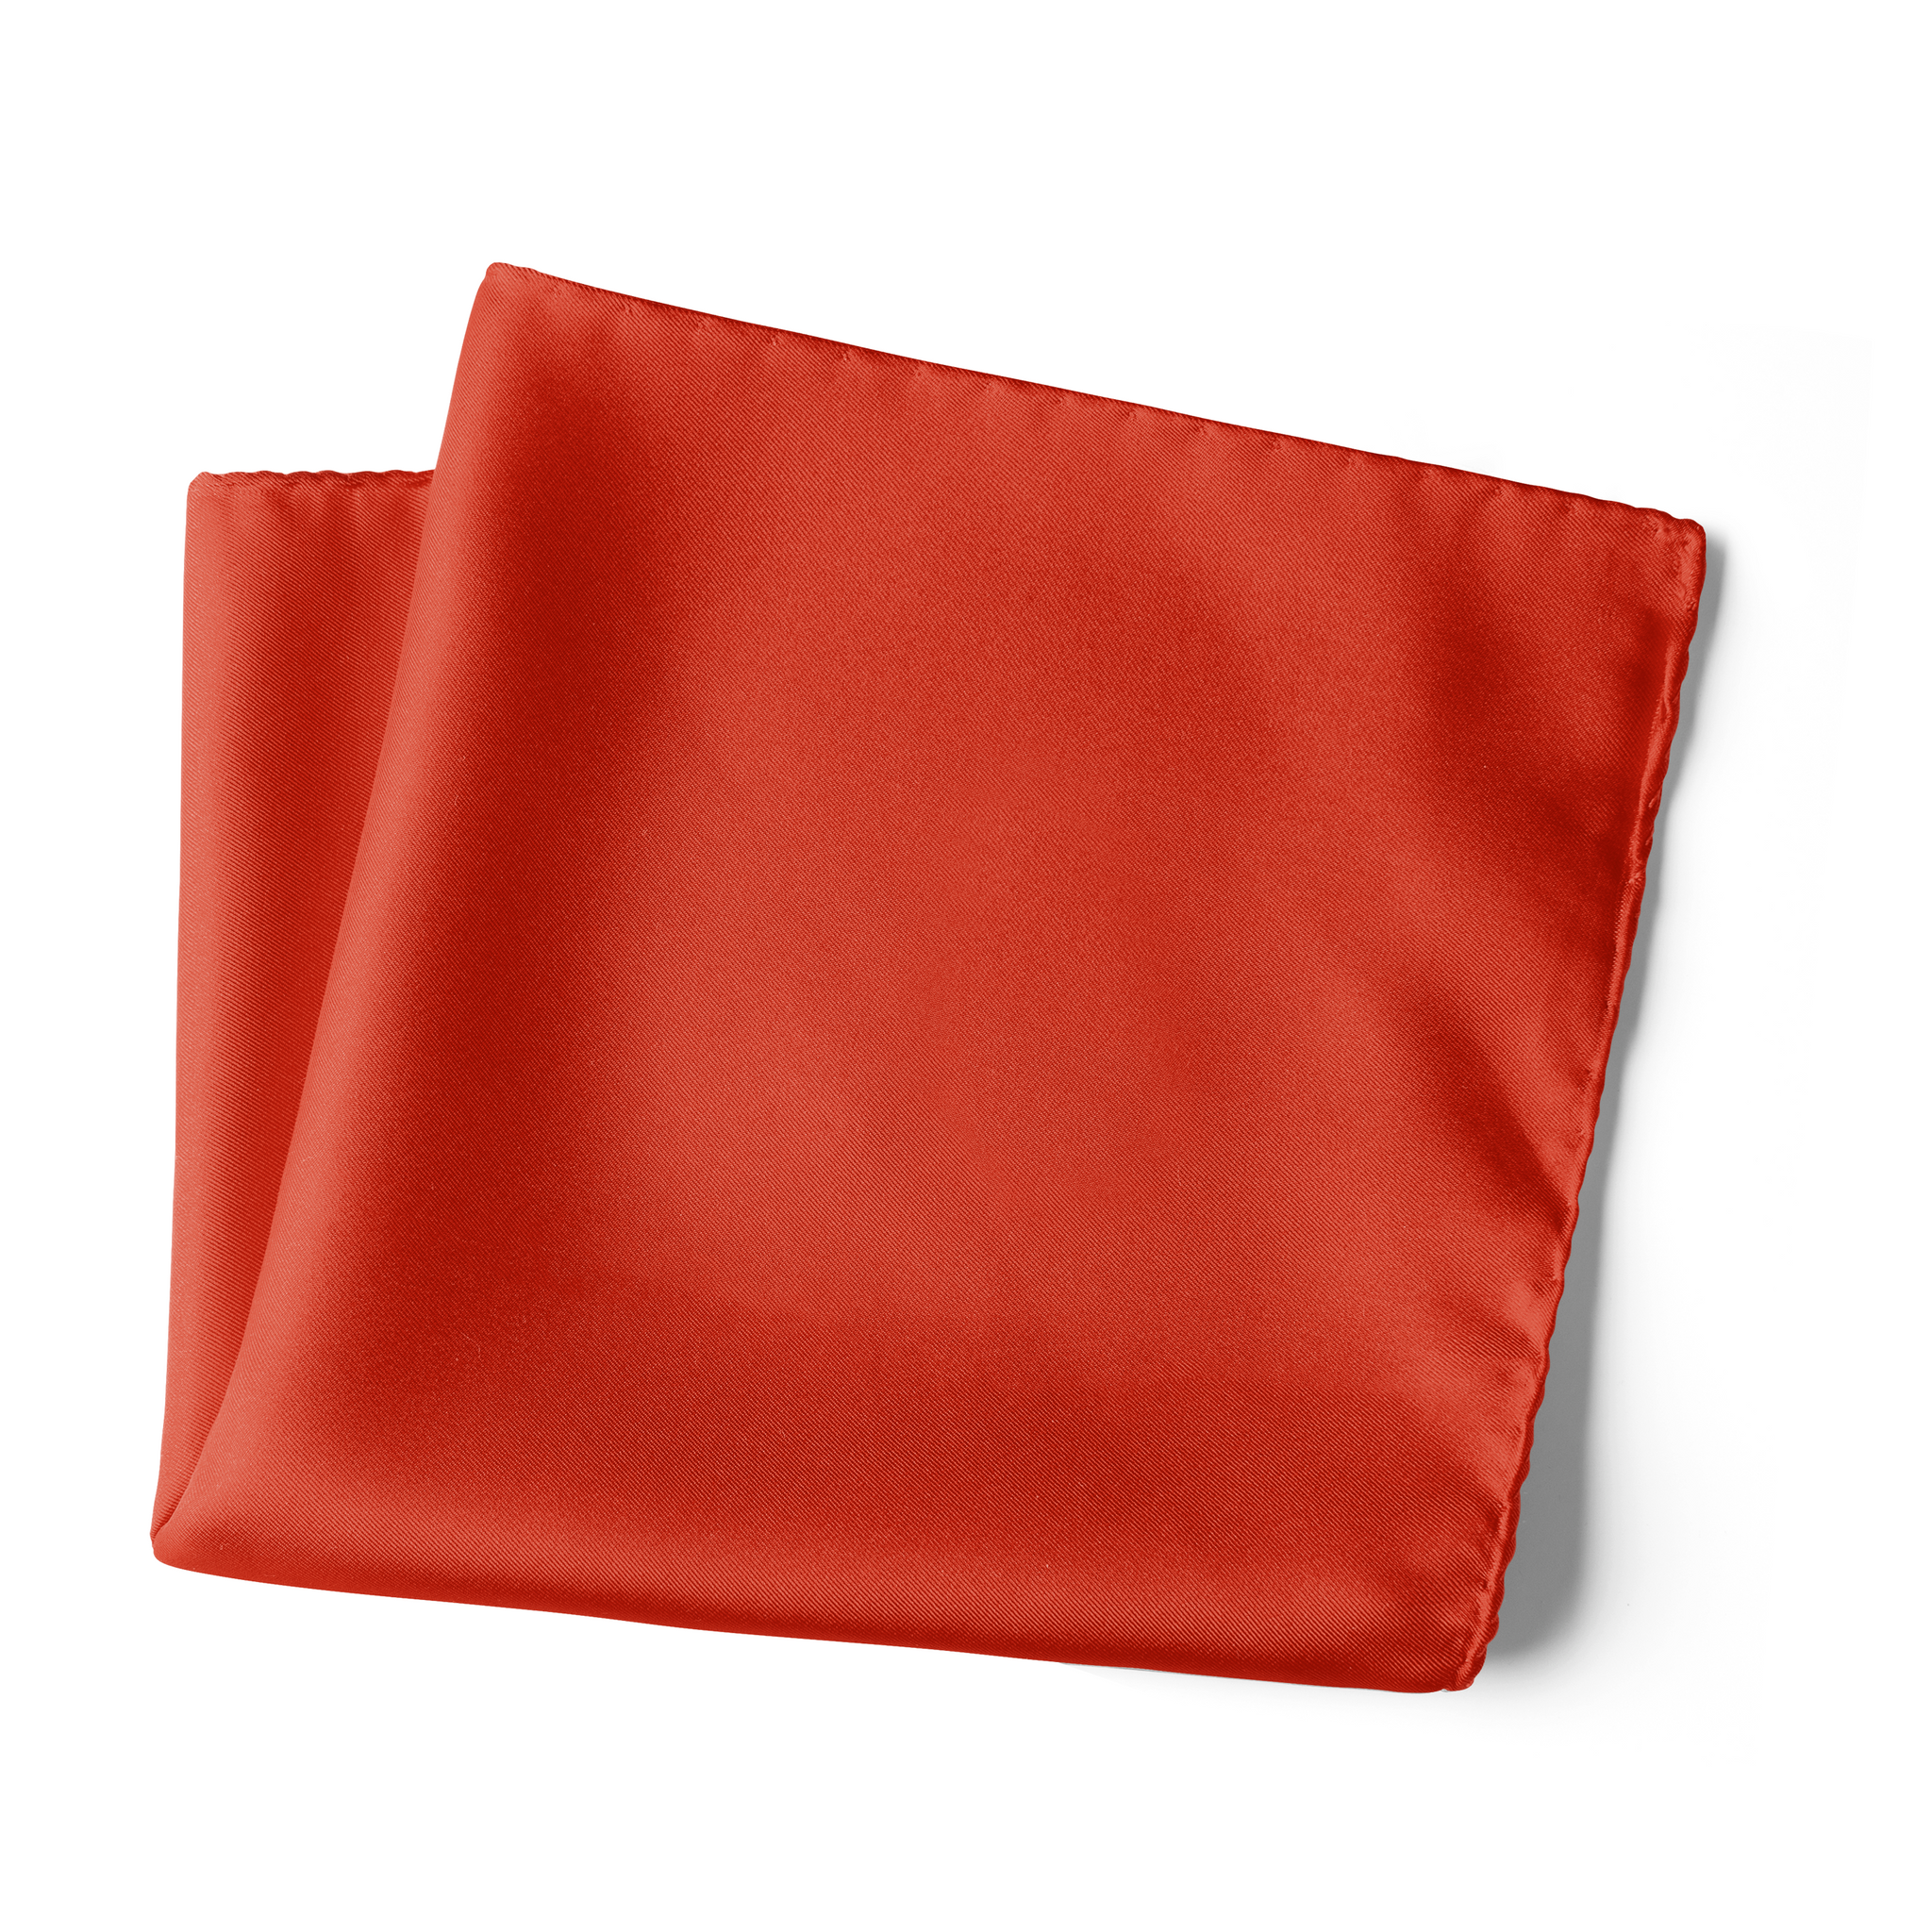 Chokore Terracotta Colour Pure Silk Pocket Square, from the Solids Line